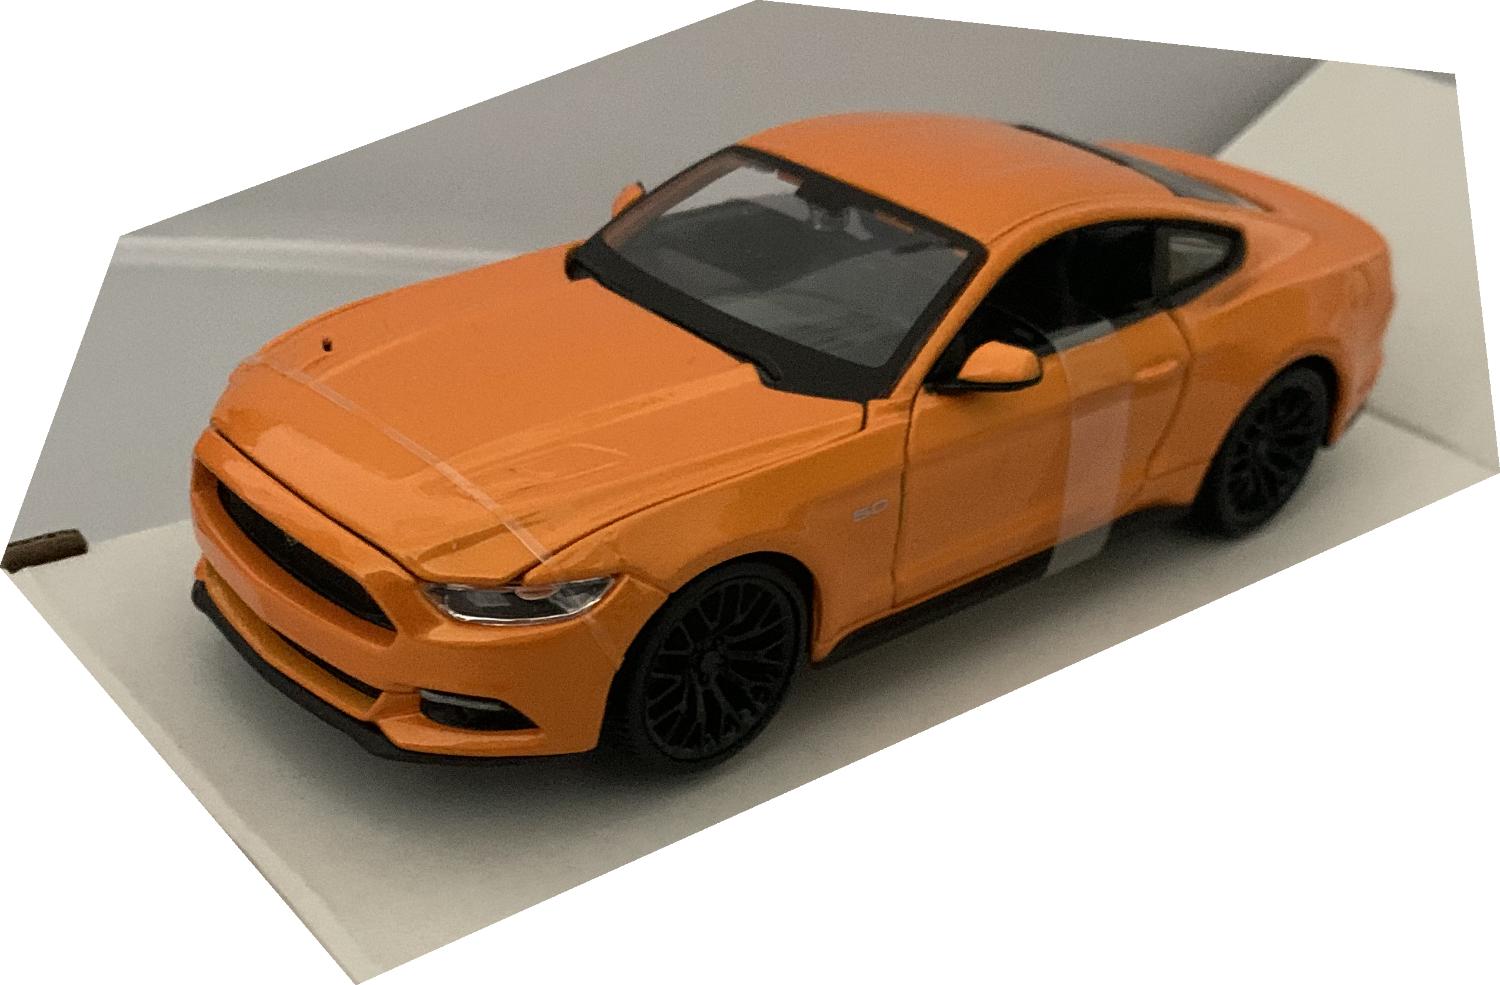 An excellent scale model of a Ford Mustang GT decorated in metallic orange with black wheels.